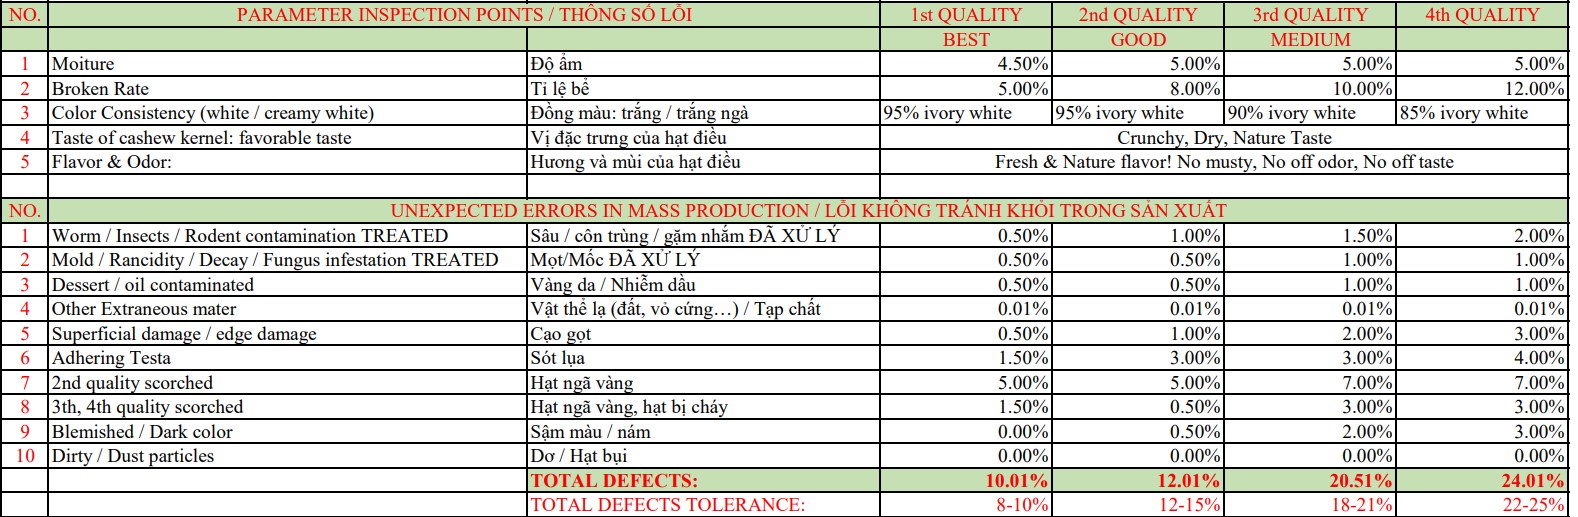 Table Of Cashew nut quality parameters: 1st Quality, 2nd Quality, 3rd Quality... Based-on AFI Standard